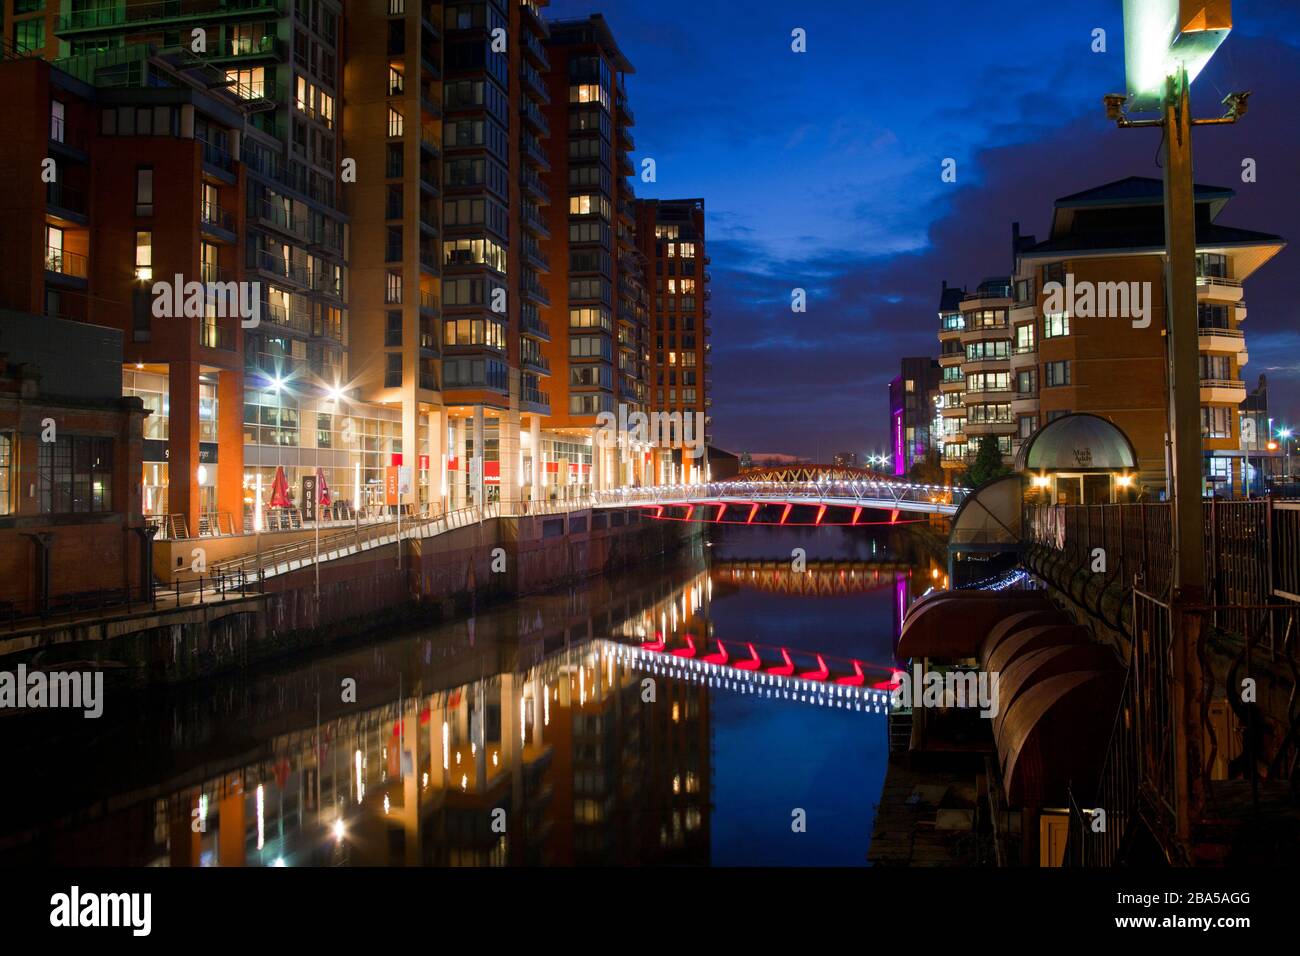 Architectural bridges and piers. Modern, gentrification, River Irwell, Manchester, new builds, river front Stock Photo